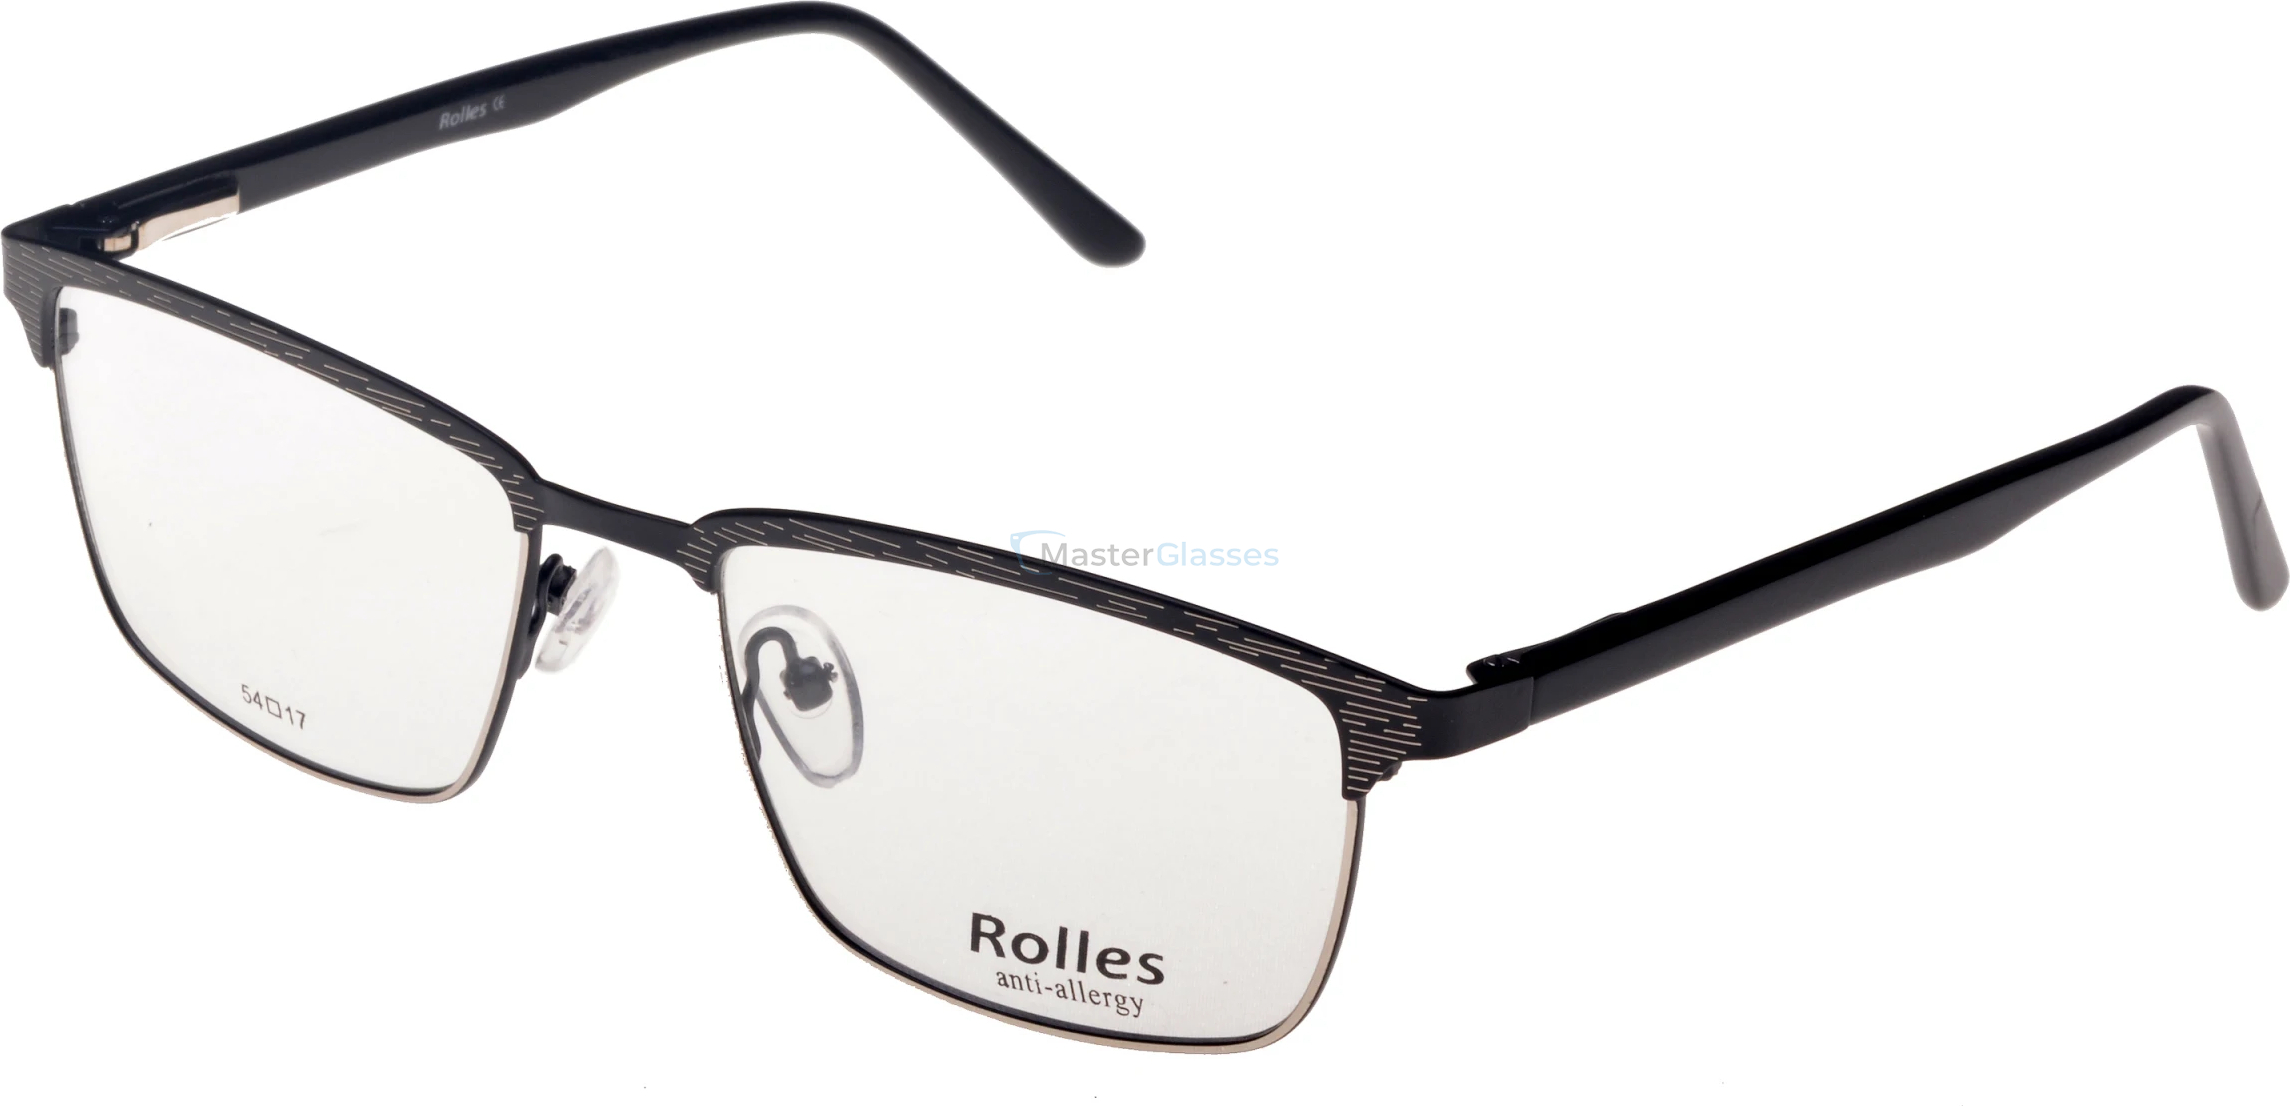  Rolles 587 01